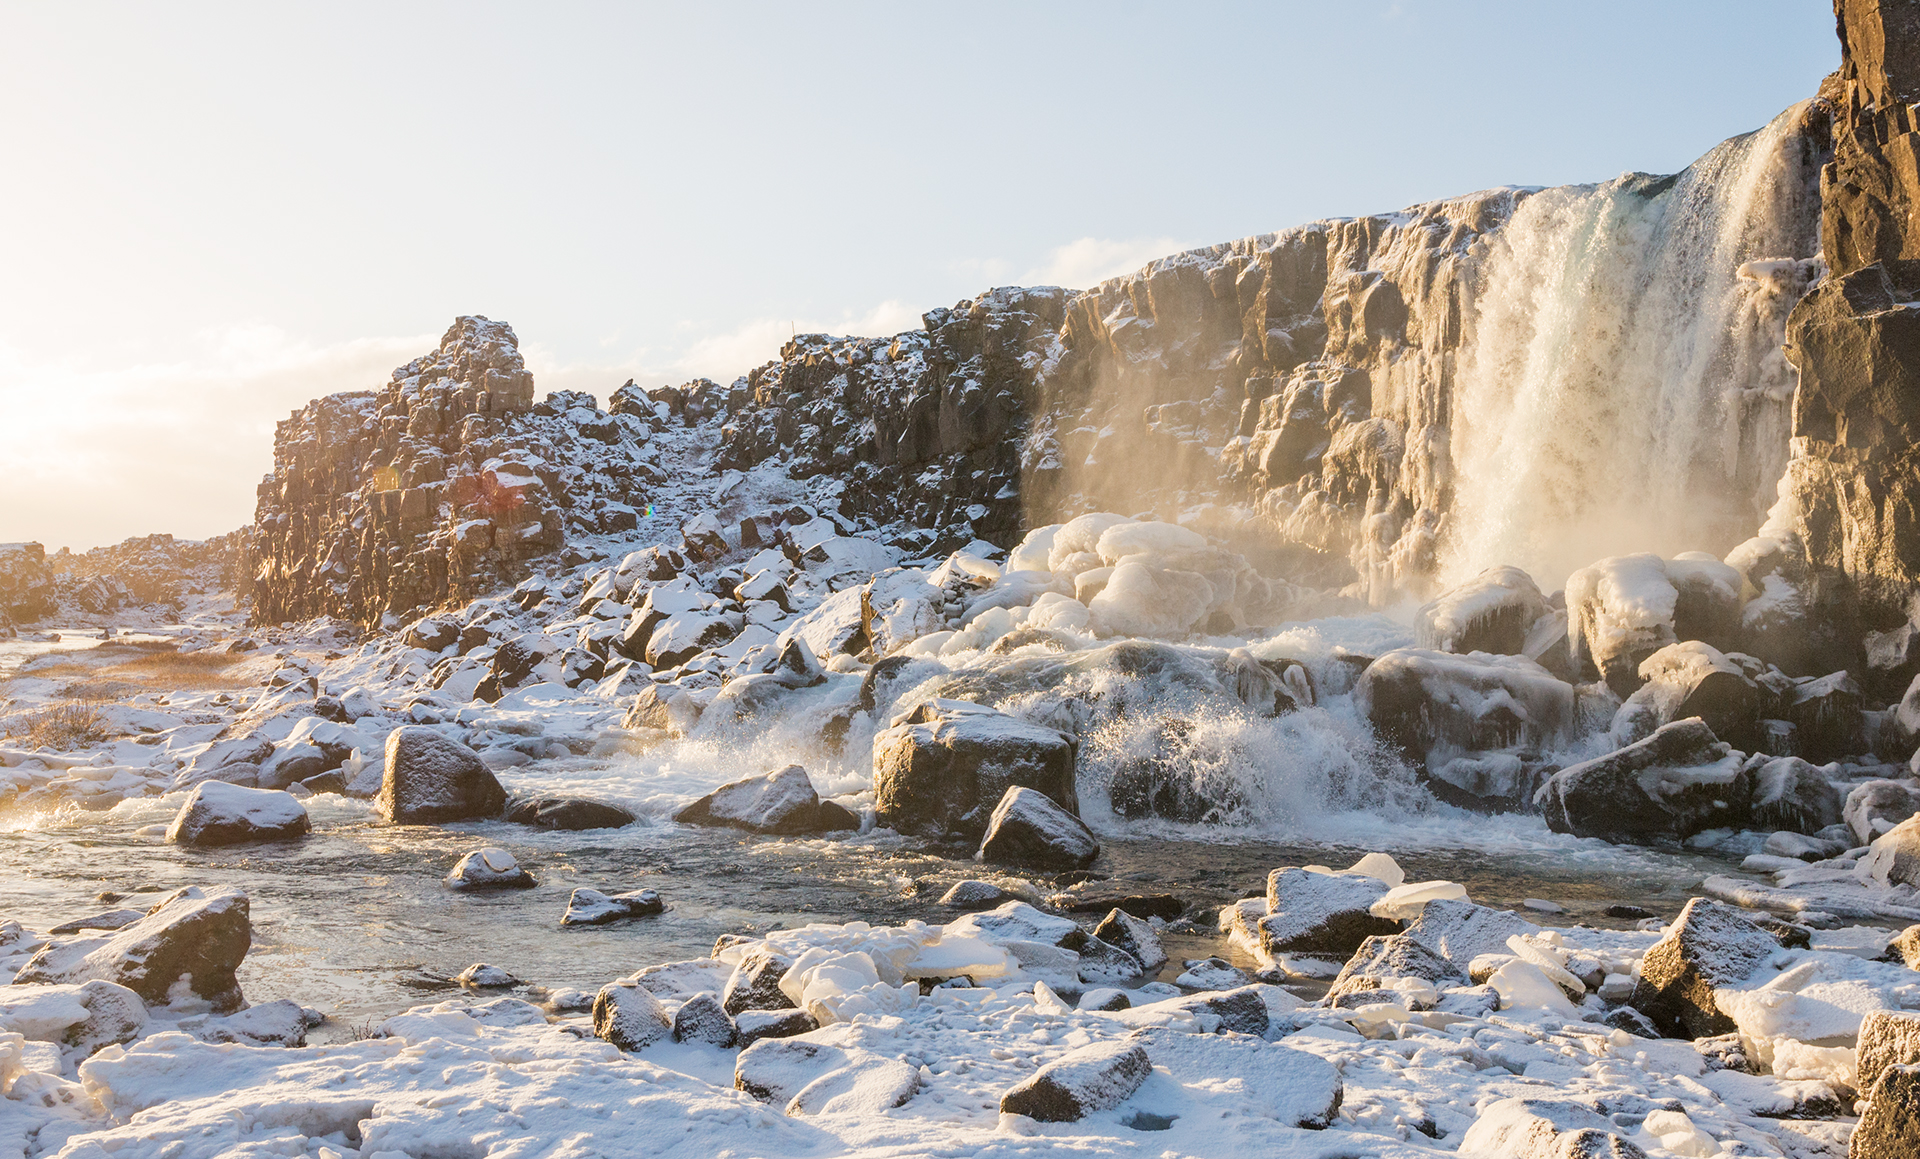 Oxararfoss during the winter days in Iceland